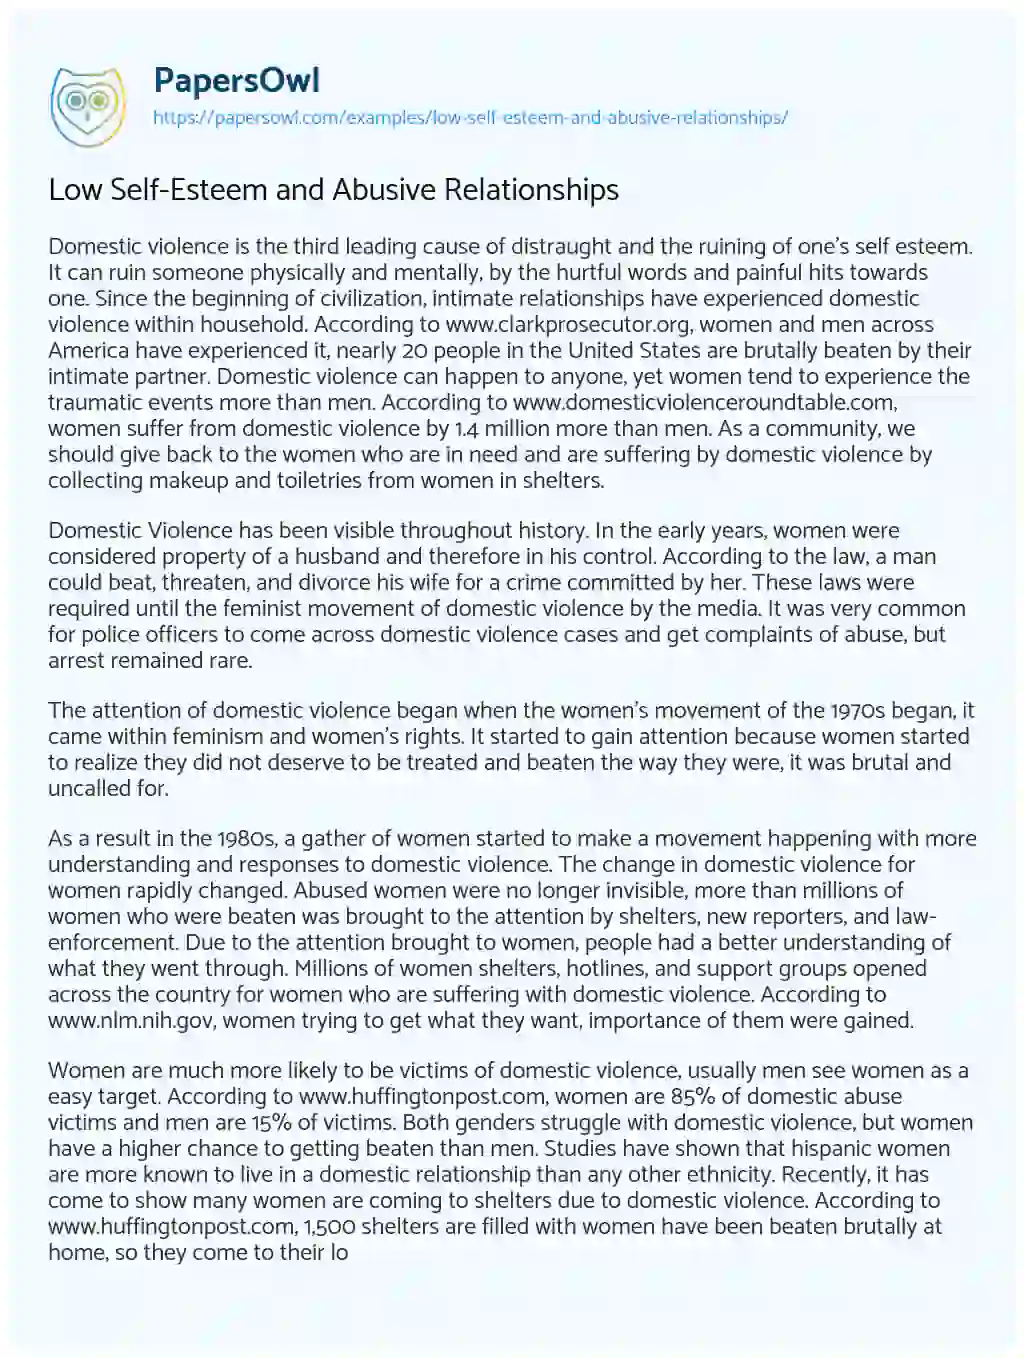 Low Self-Esteem and Abusive Relationships essay